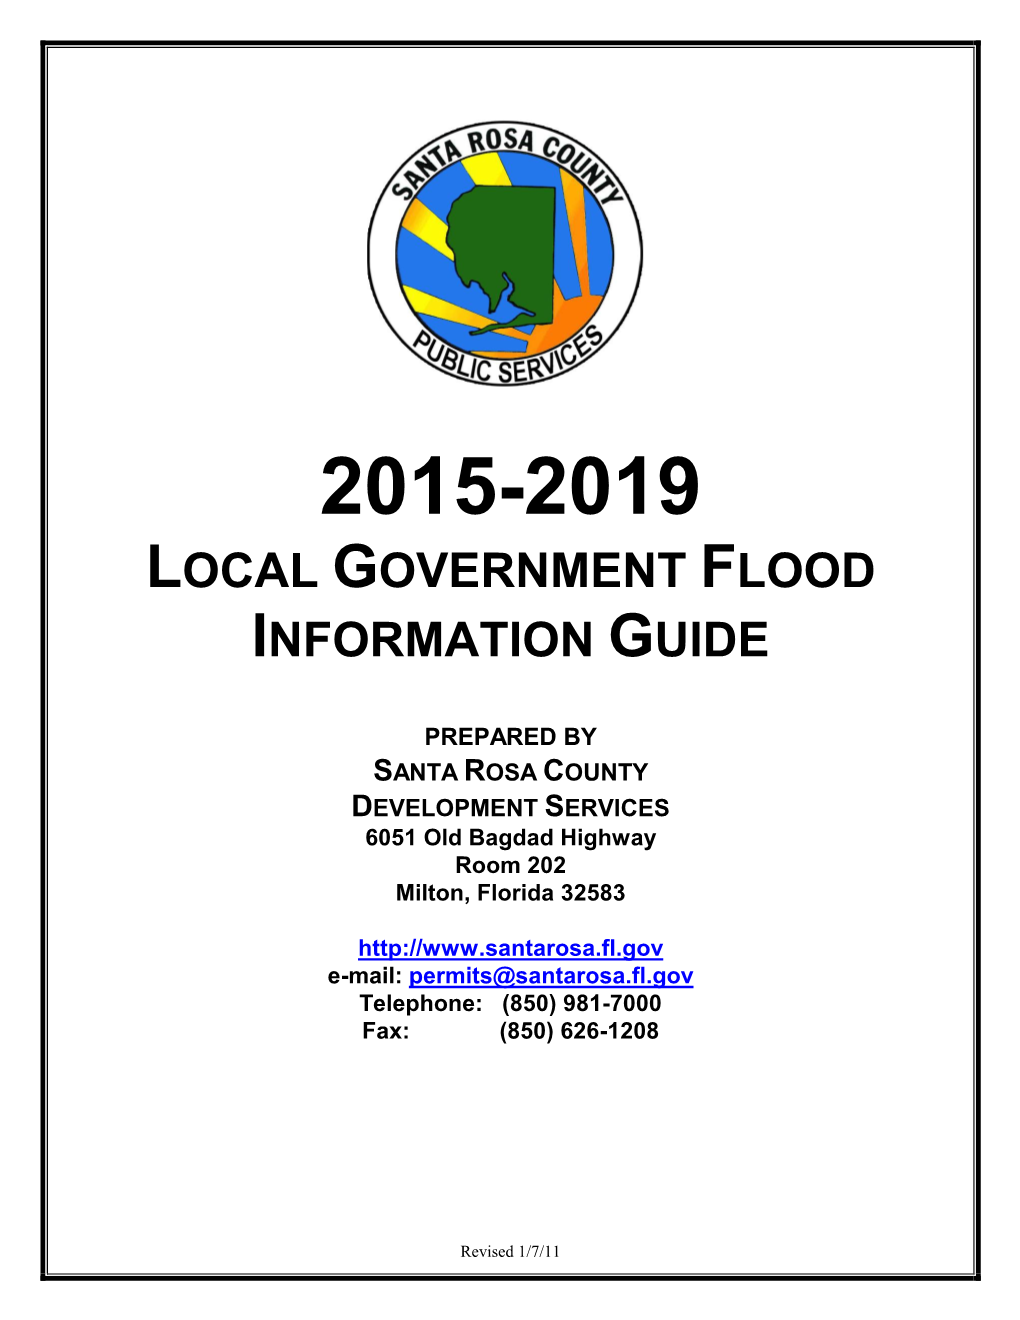 2015-2019 Local Government Flood Information Guide